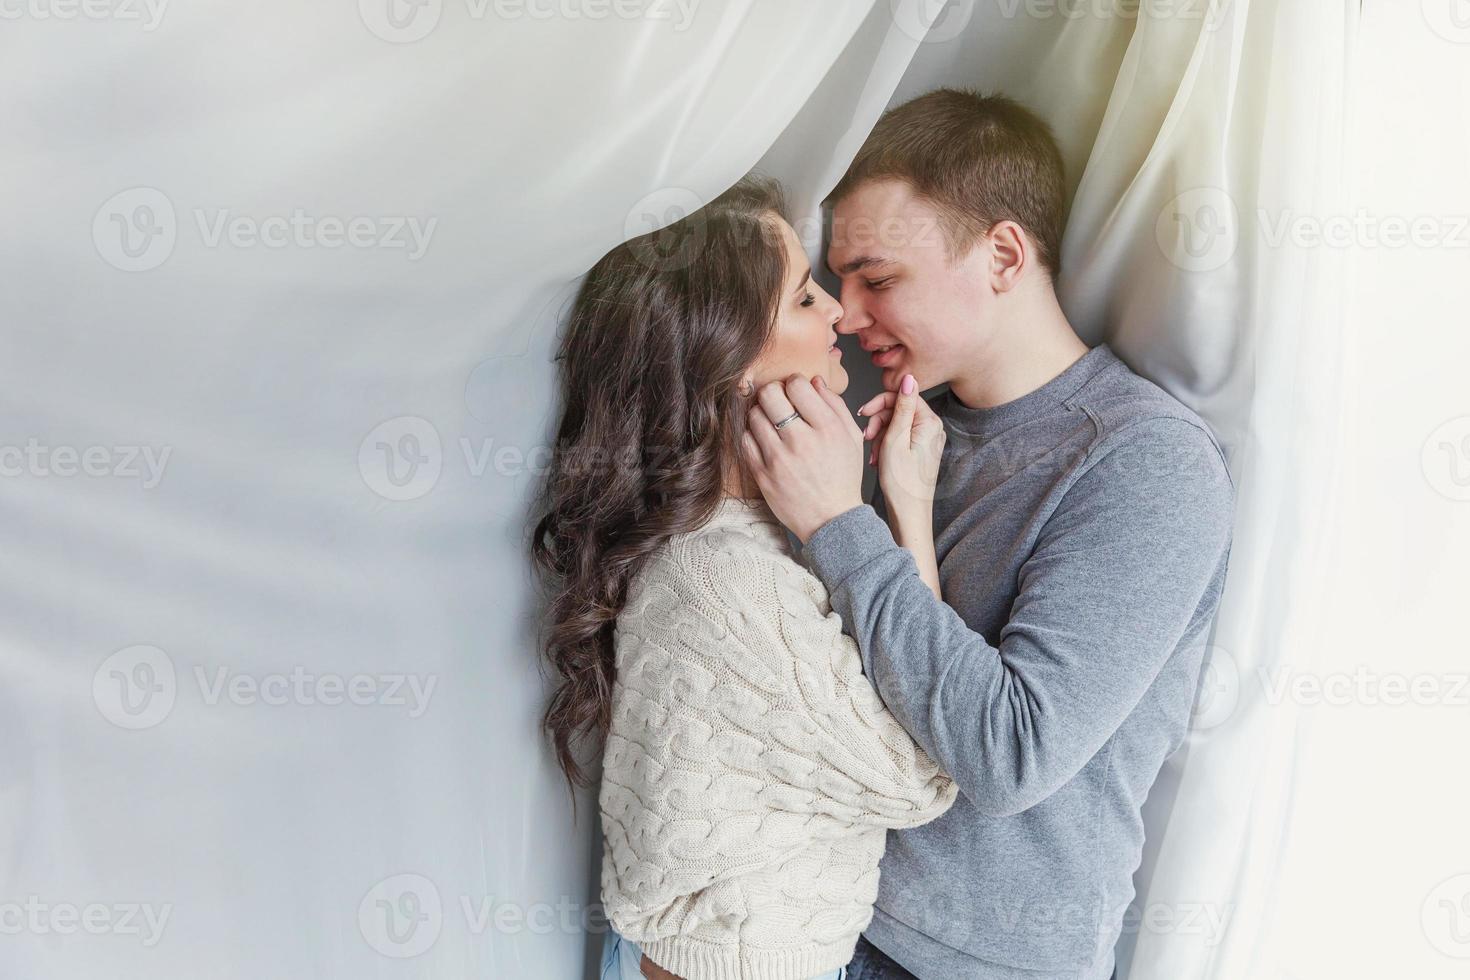 Romantic sexy couple in love having nice time together. Young woman hugging boyfriend, white background photo